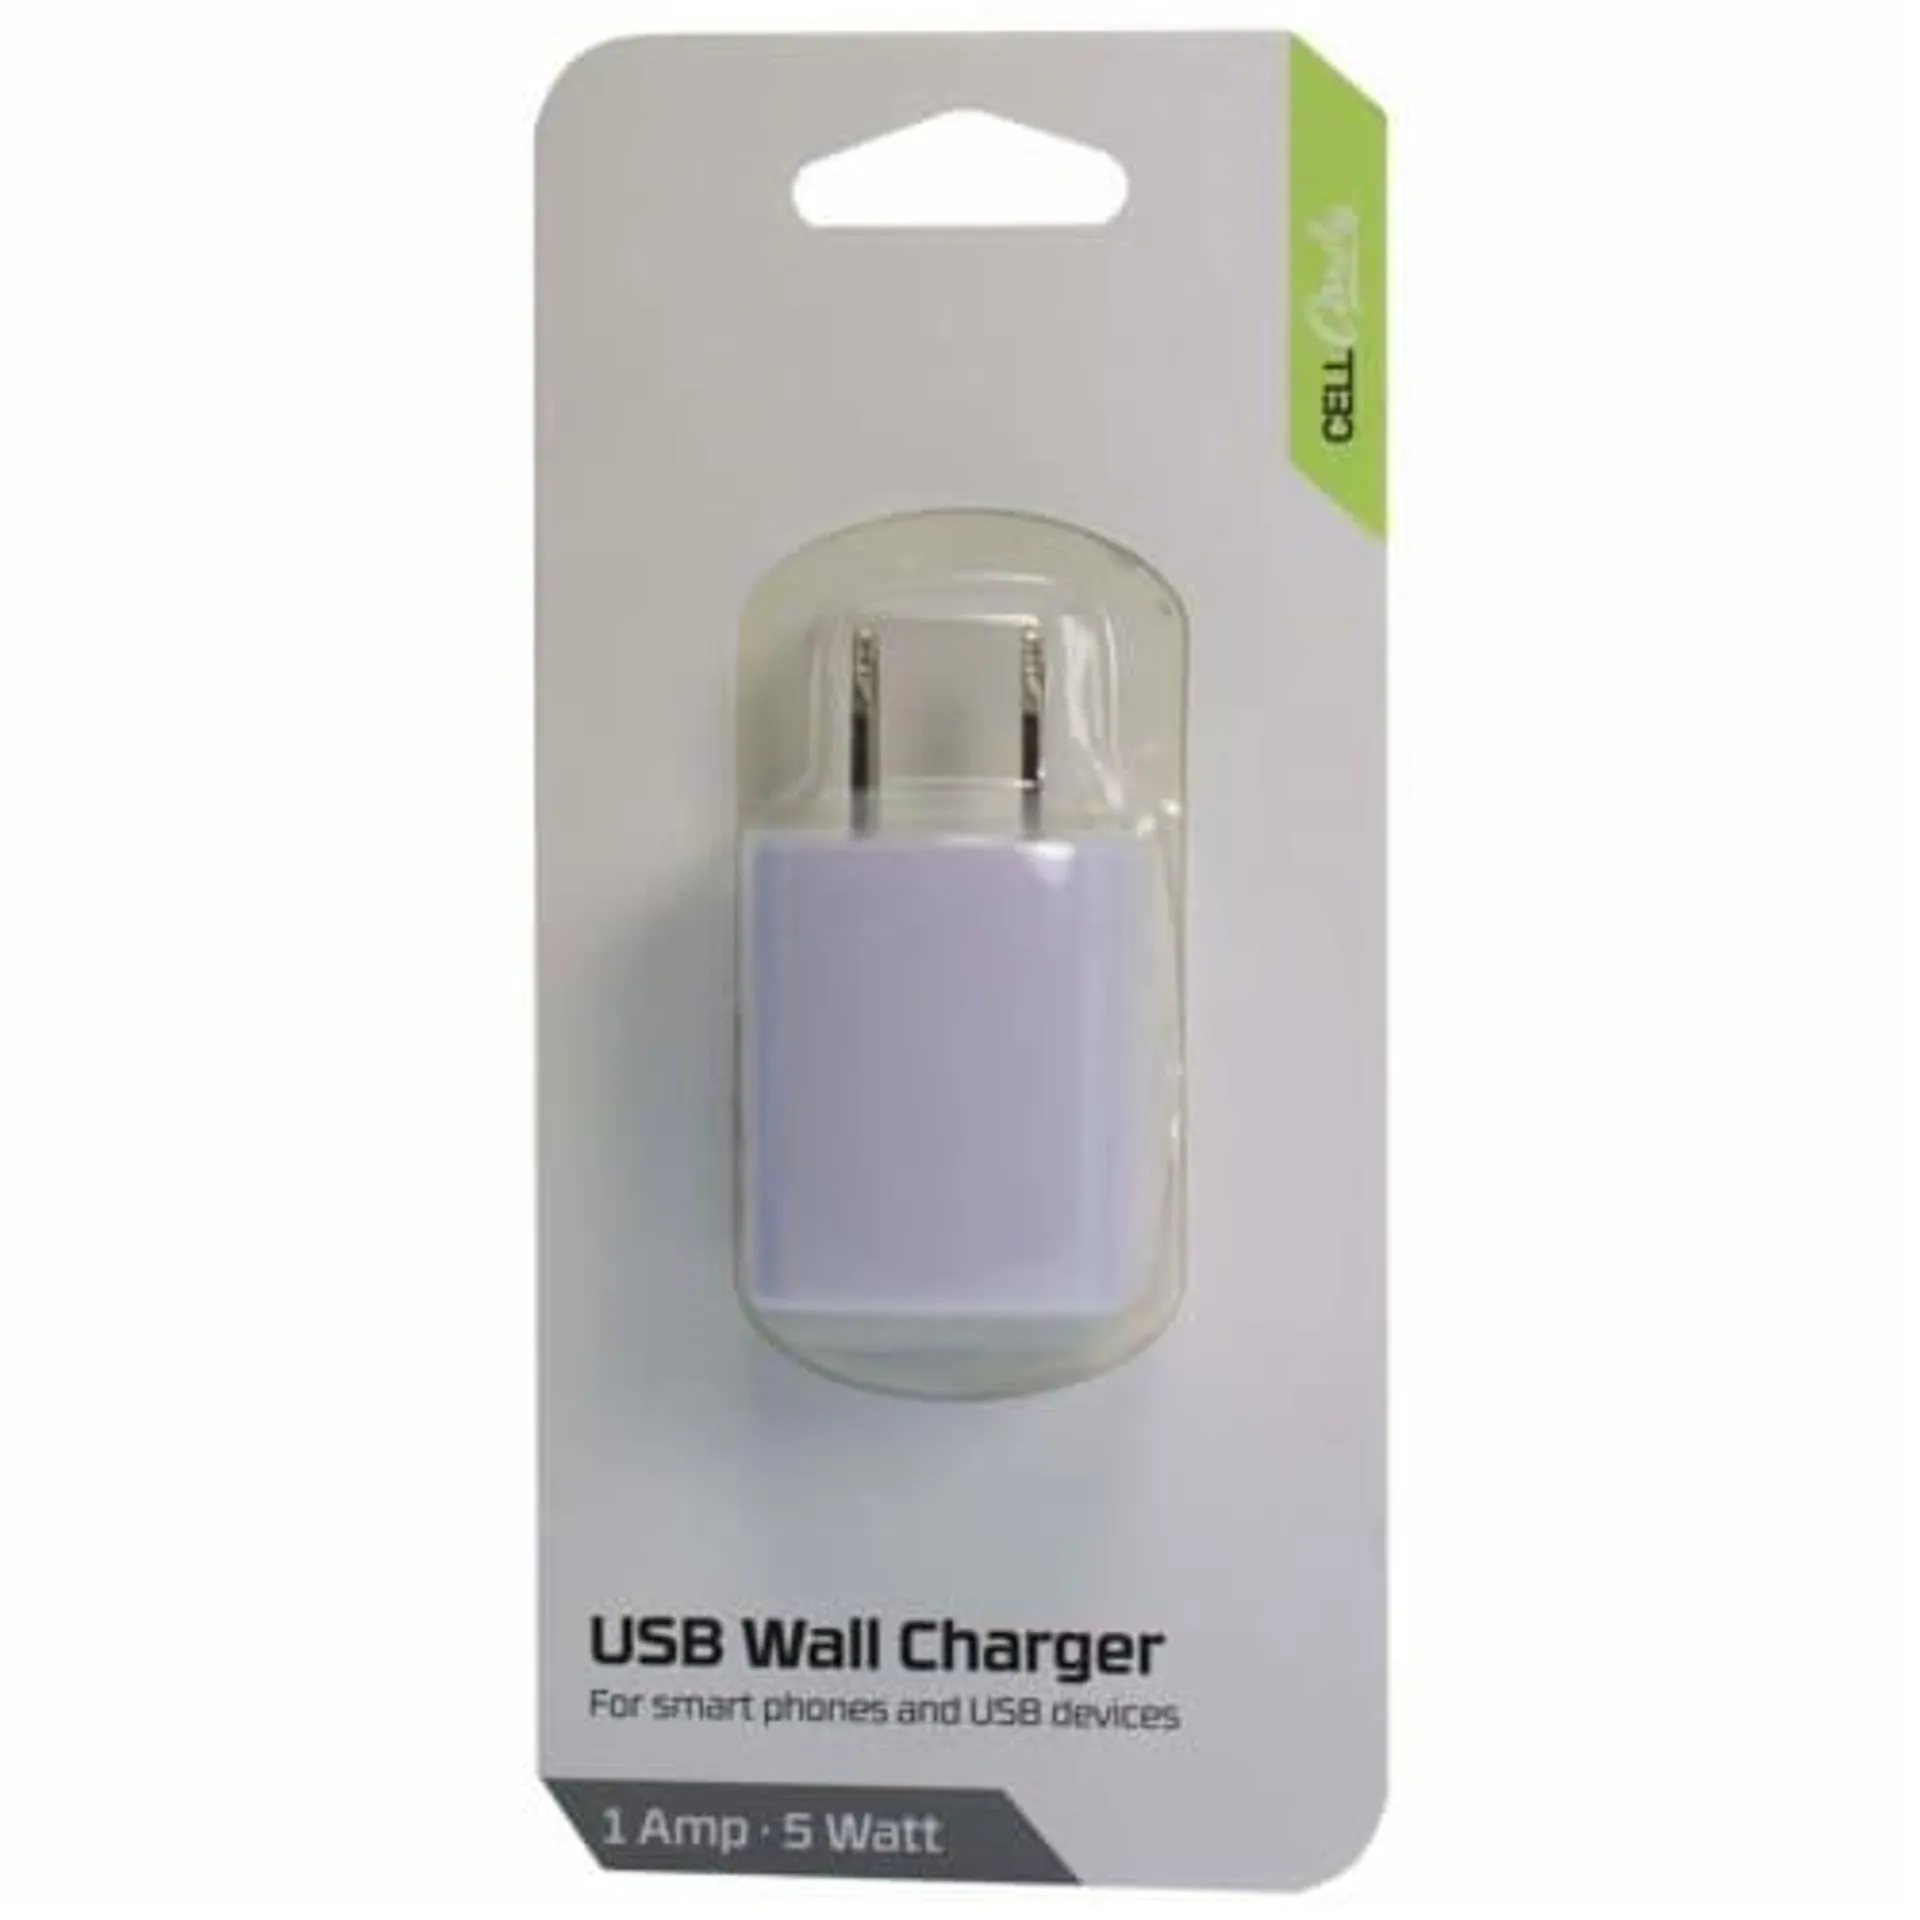 CELLCandy USB Wall Charger - White